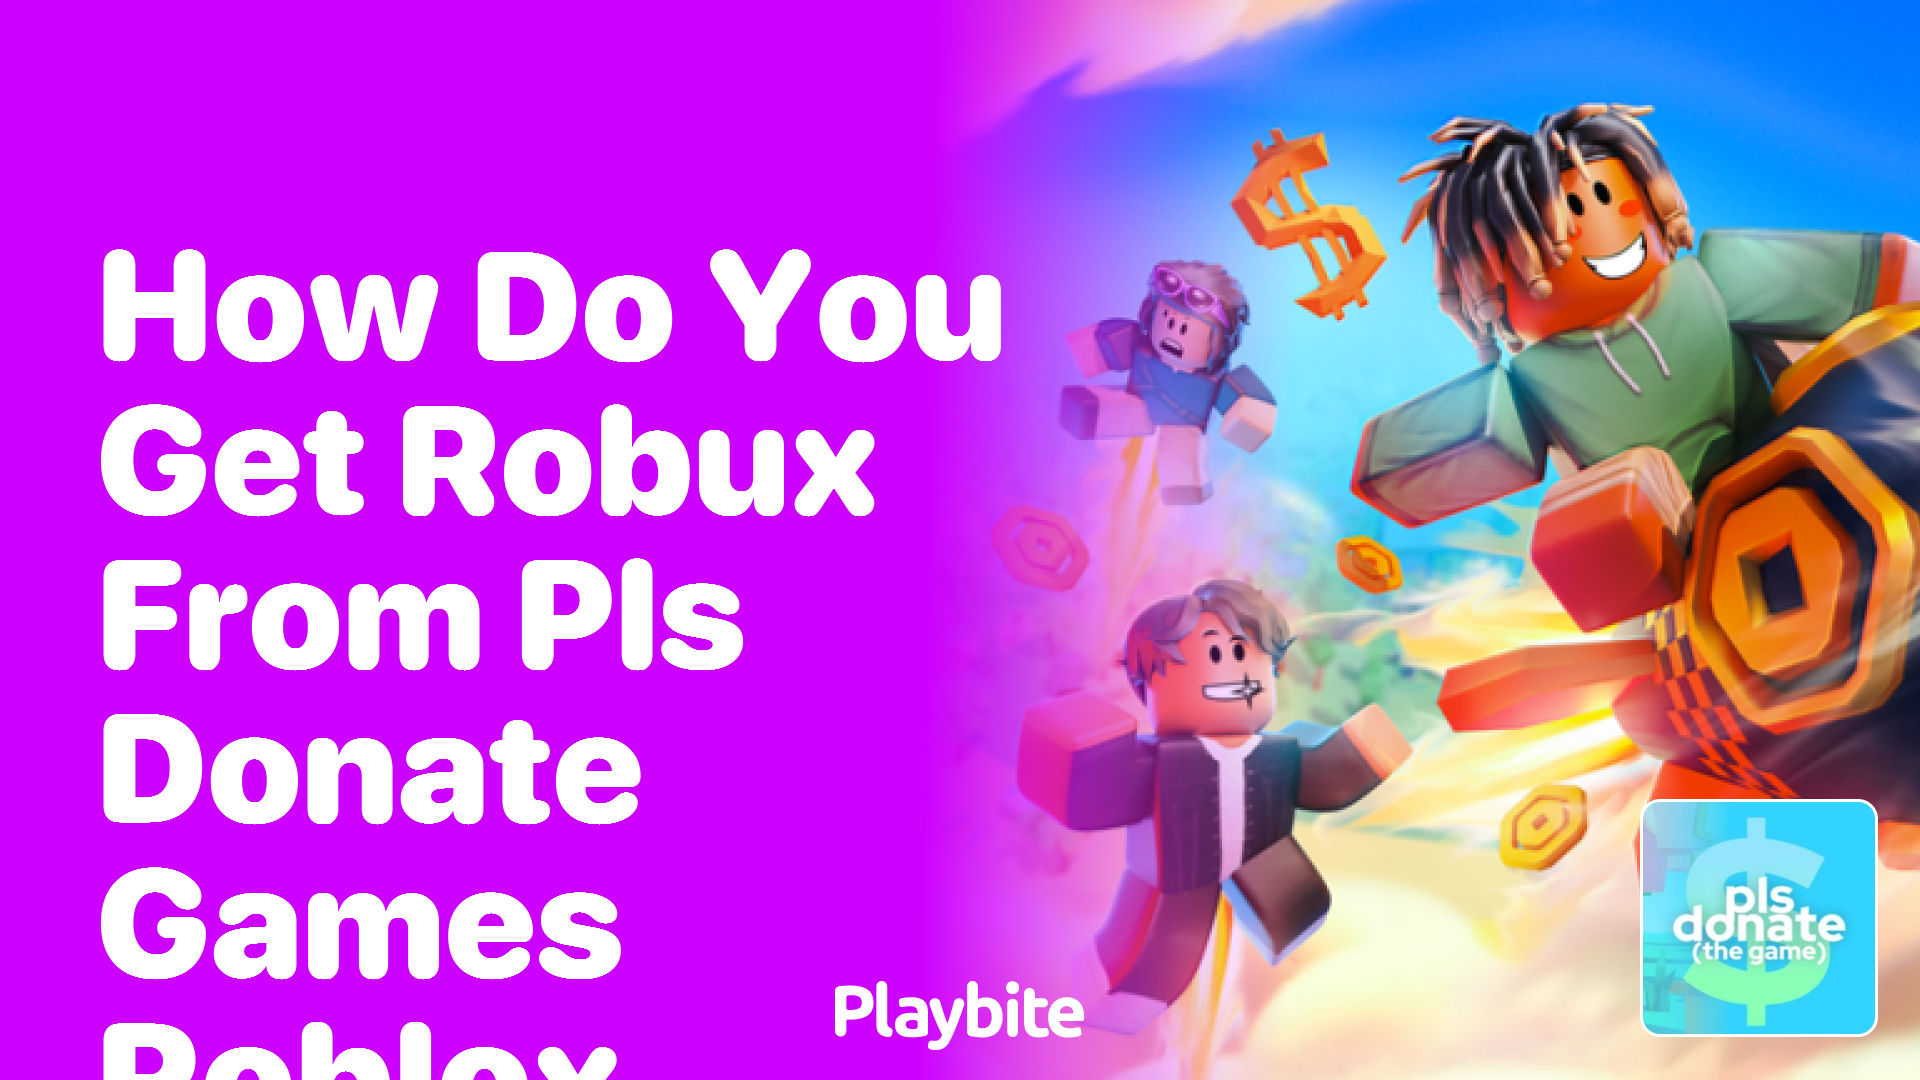 How Do You Get Robux from PLS DONATE Games on Roblox?